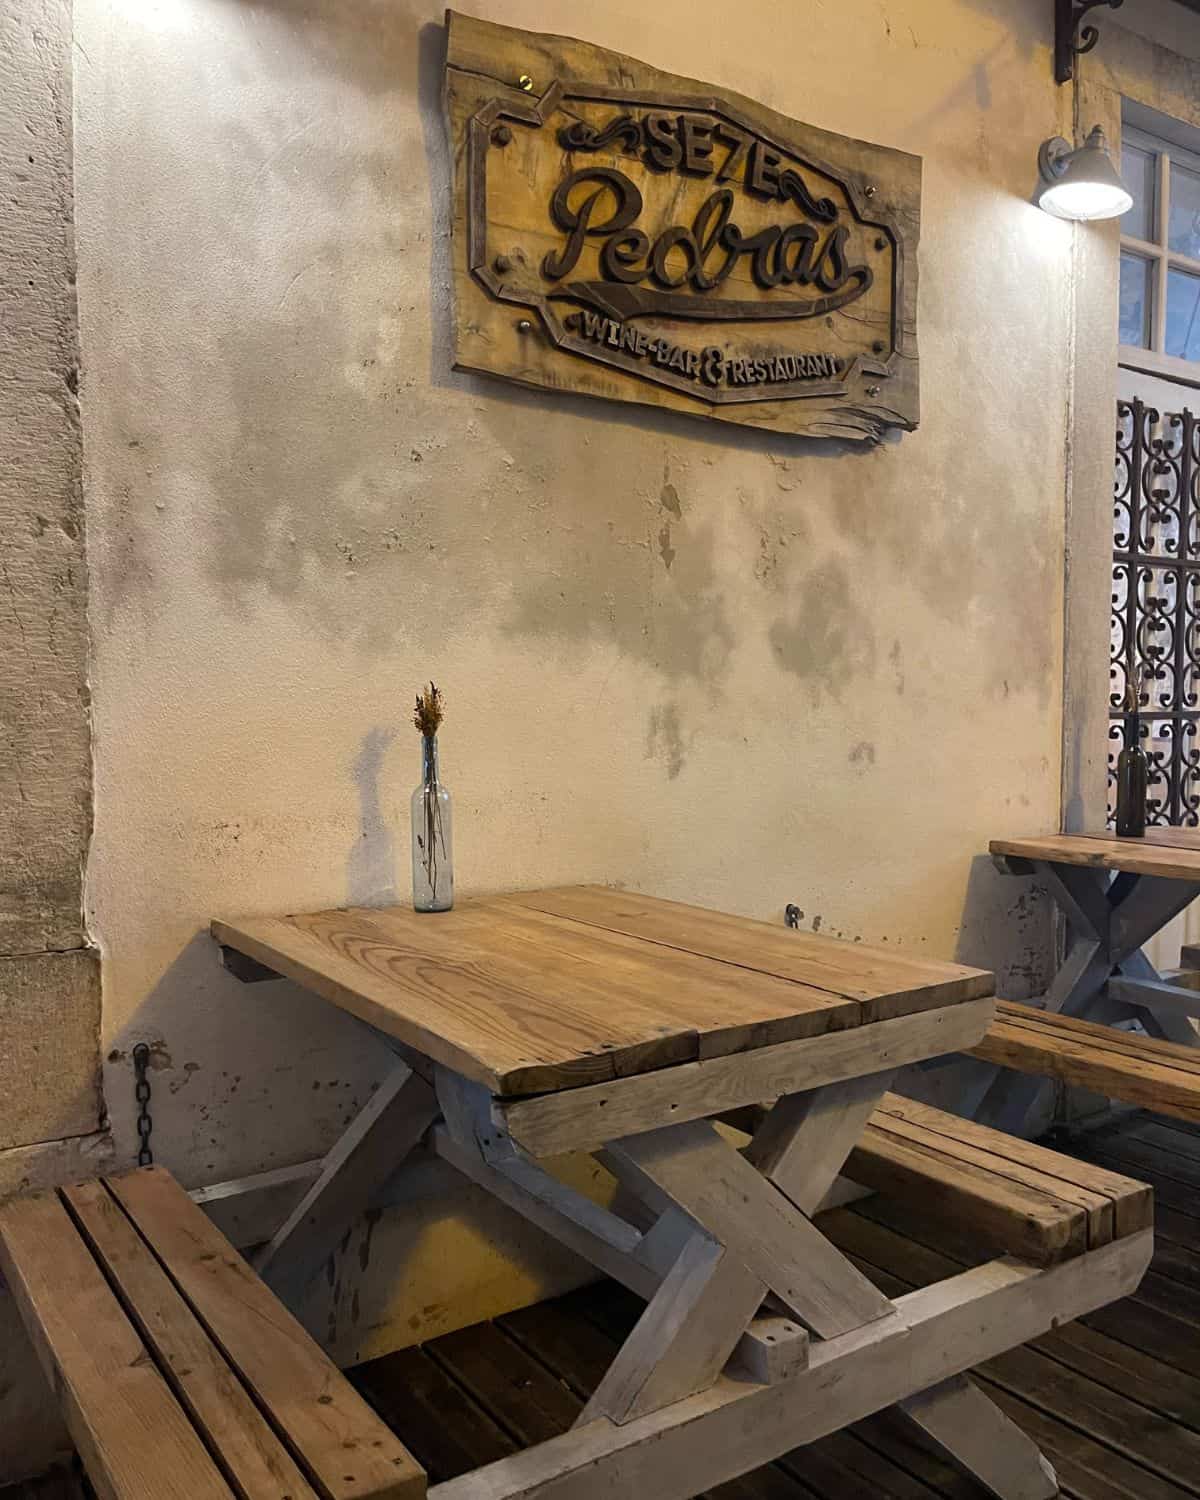 An outdoor seating area of a restaurant, featuring a wooden picnic-style table and benches. The rustic charm is accentuated by the textured, cream-colored wall and a vintage wooden sign reading "Taberna Pedras", indicating the establishment's name.